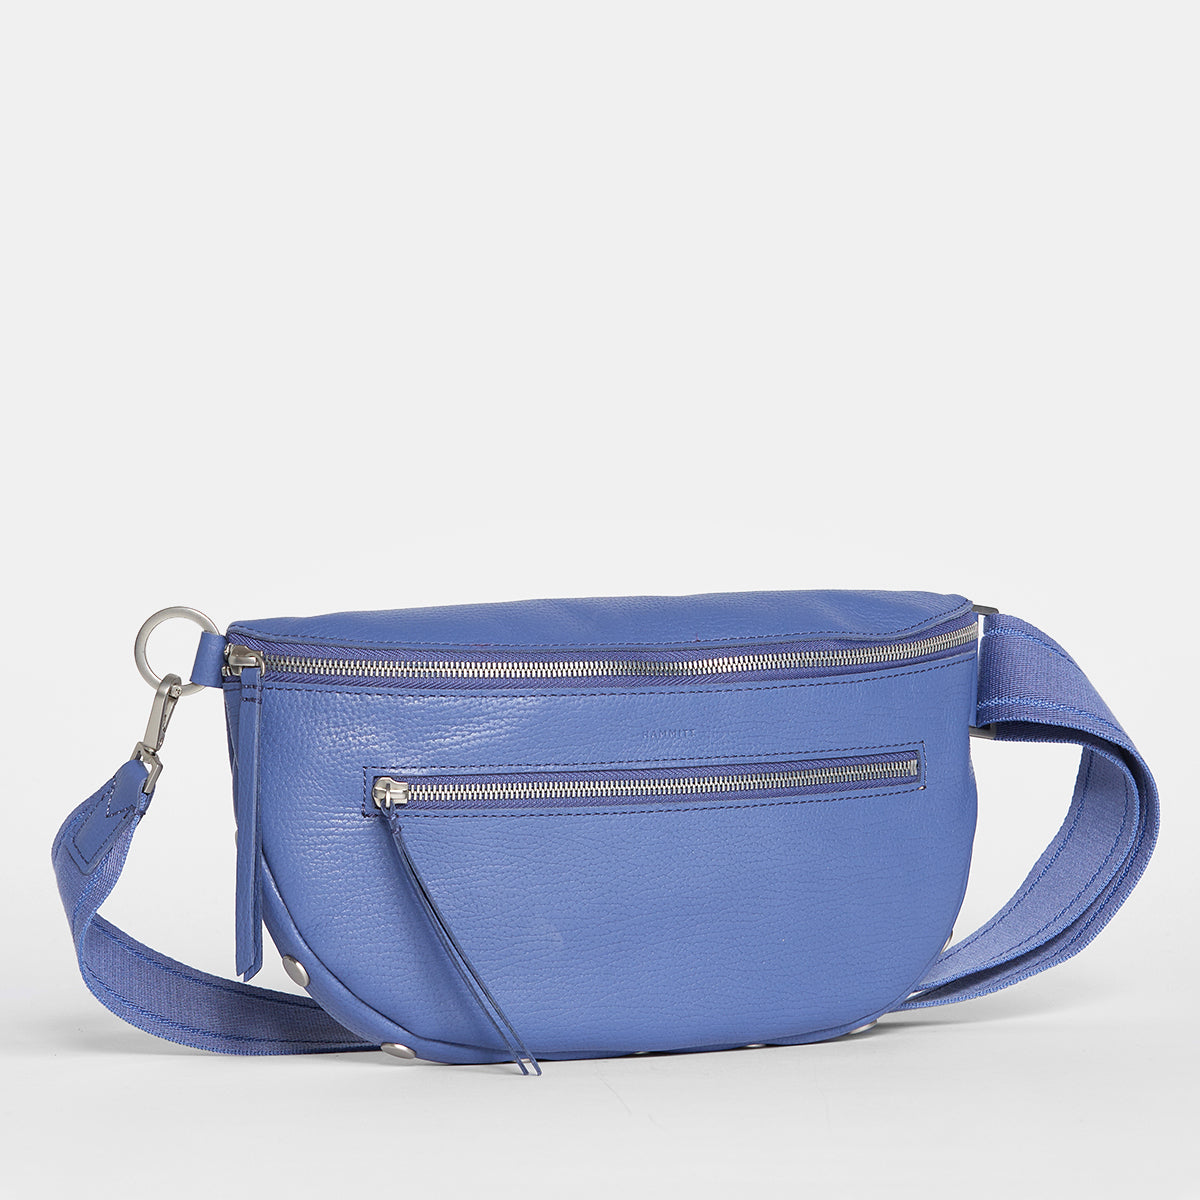 Charles-Crossbody-Lrg-Bungalow-Blue-Front-View-2